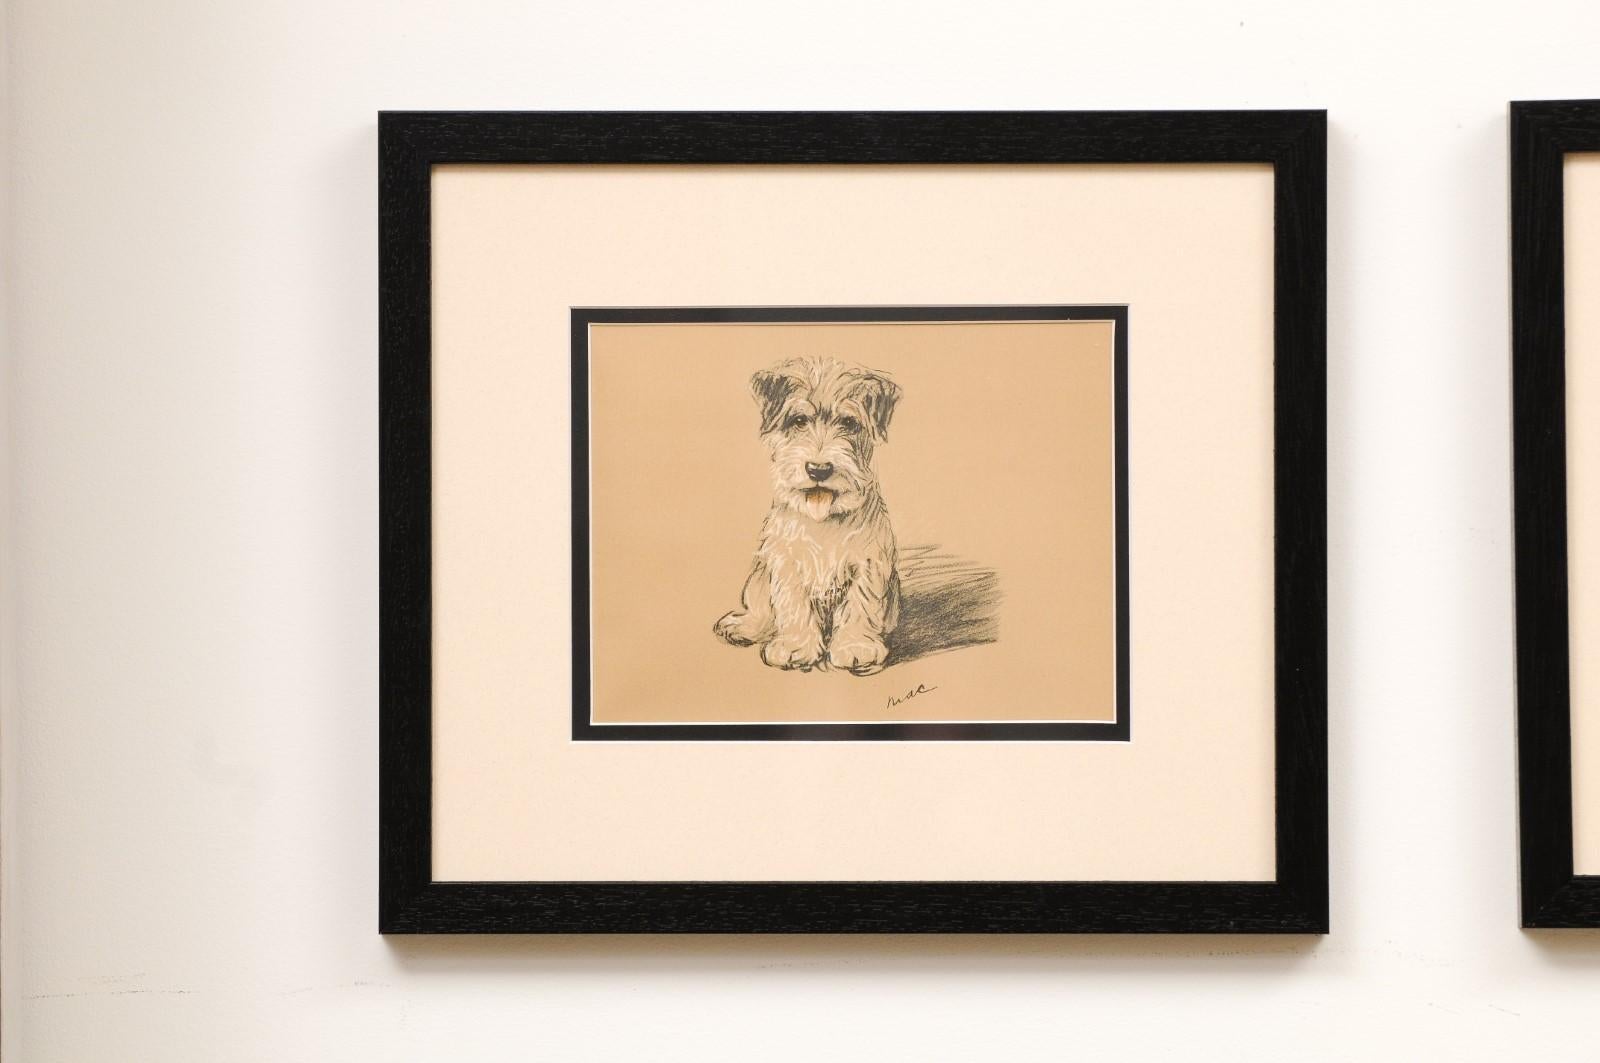 20th Century Set of 8 English Lucy Dawson Prints Depicting Dogs in Black Frames under Glass.